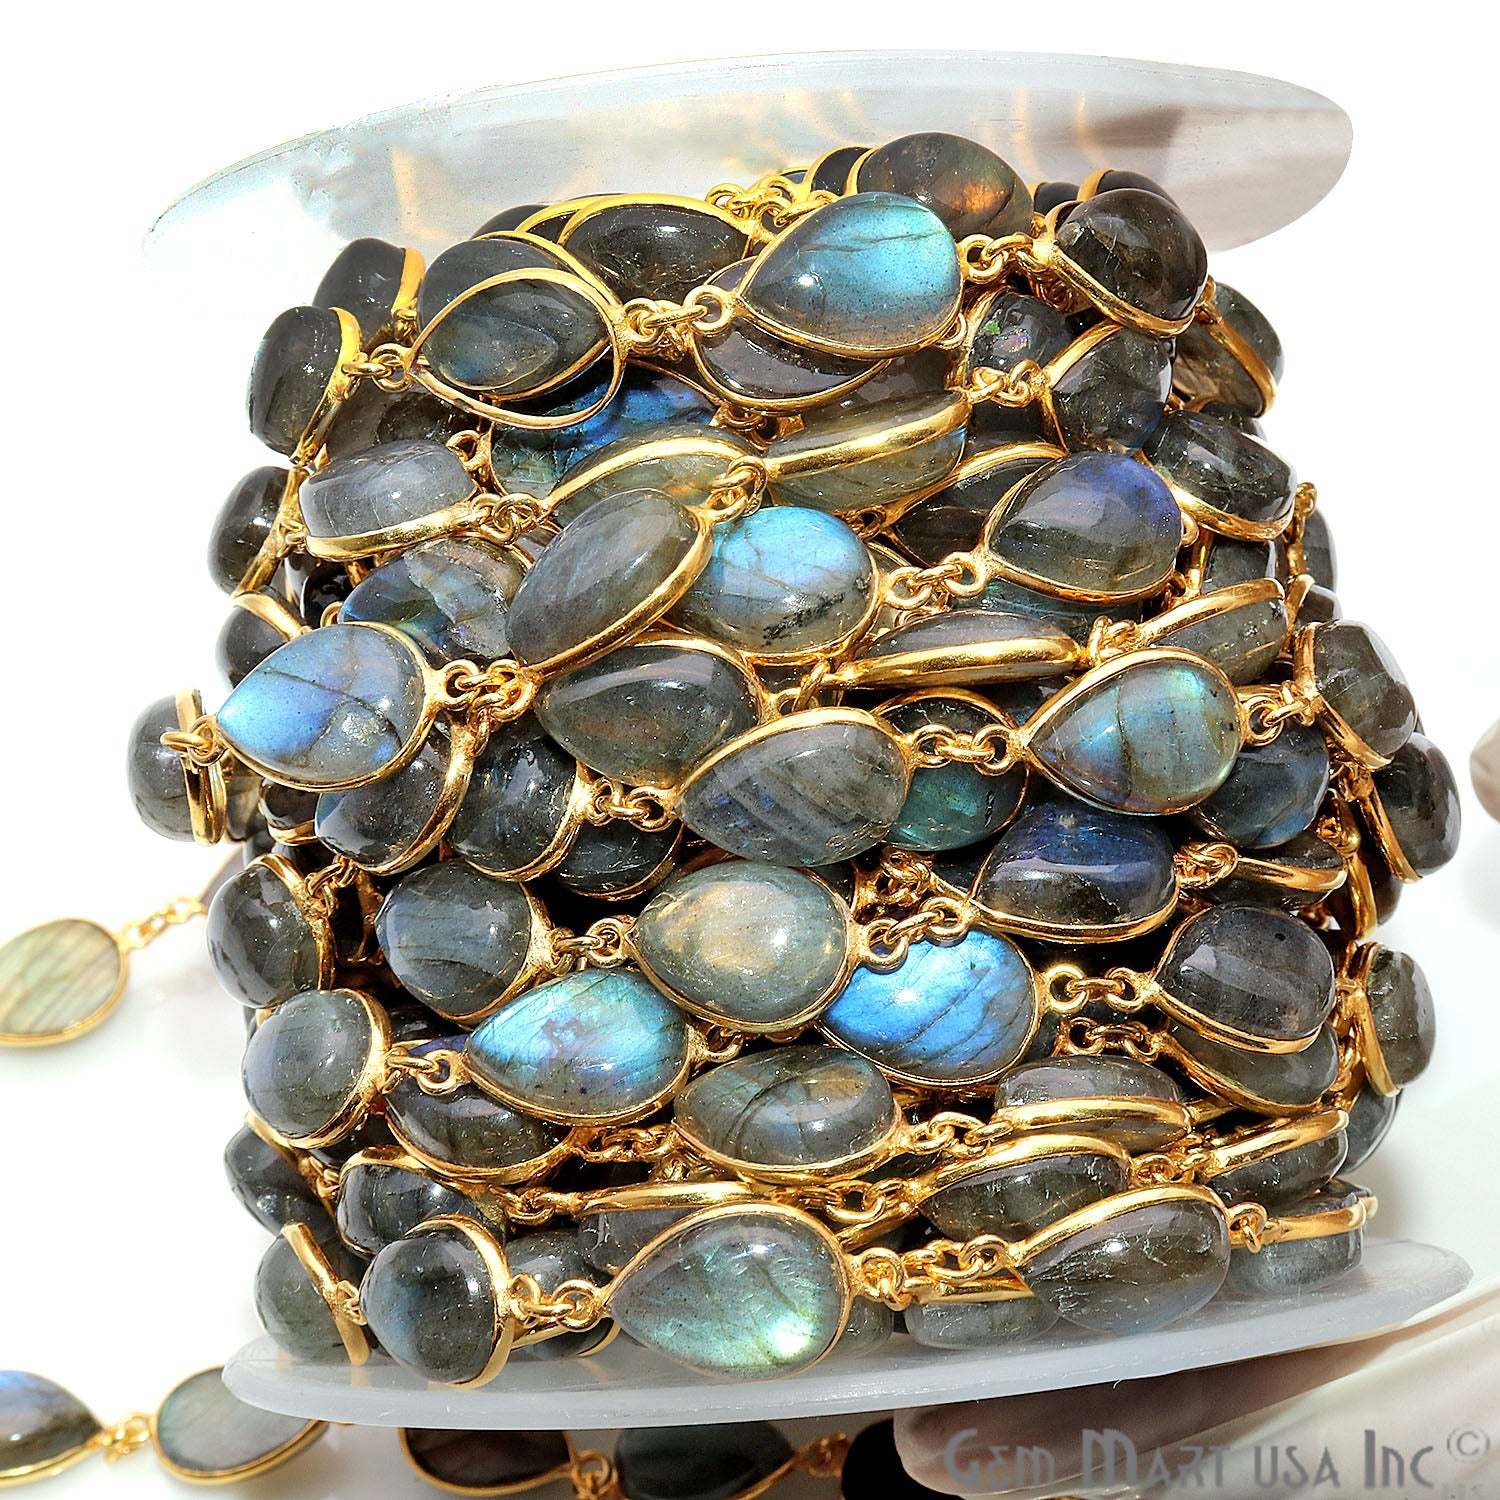 Labradorite 12x15mm Pear Gold Plated Continuous Connector Chain - GemMartUSA